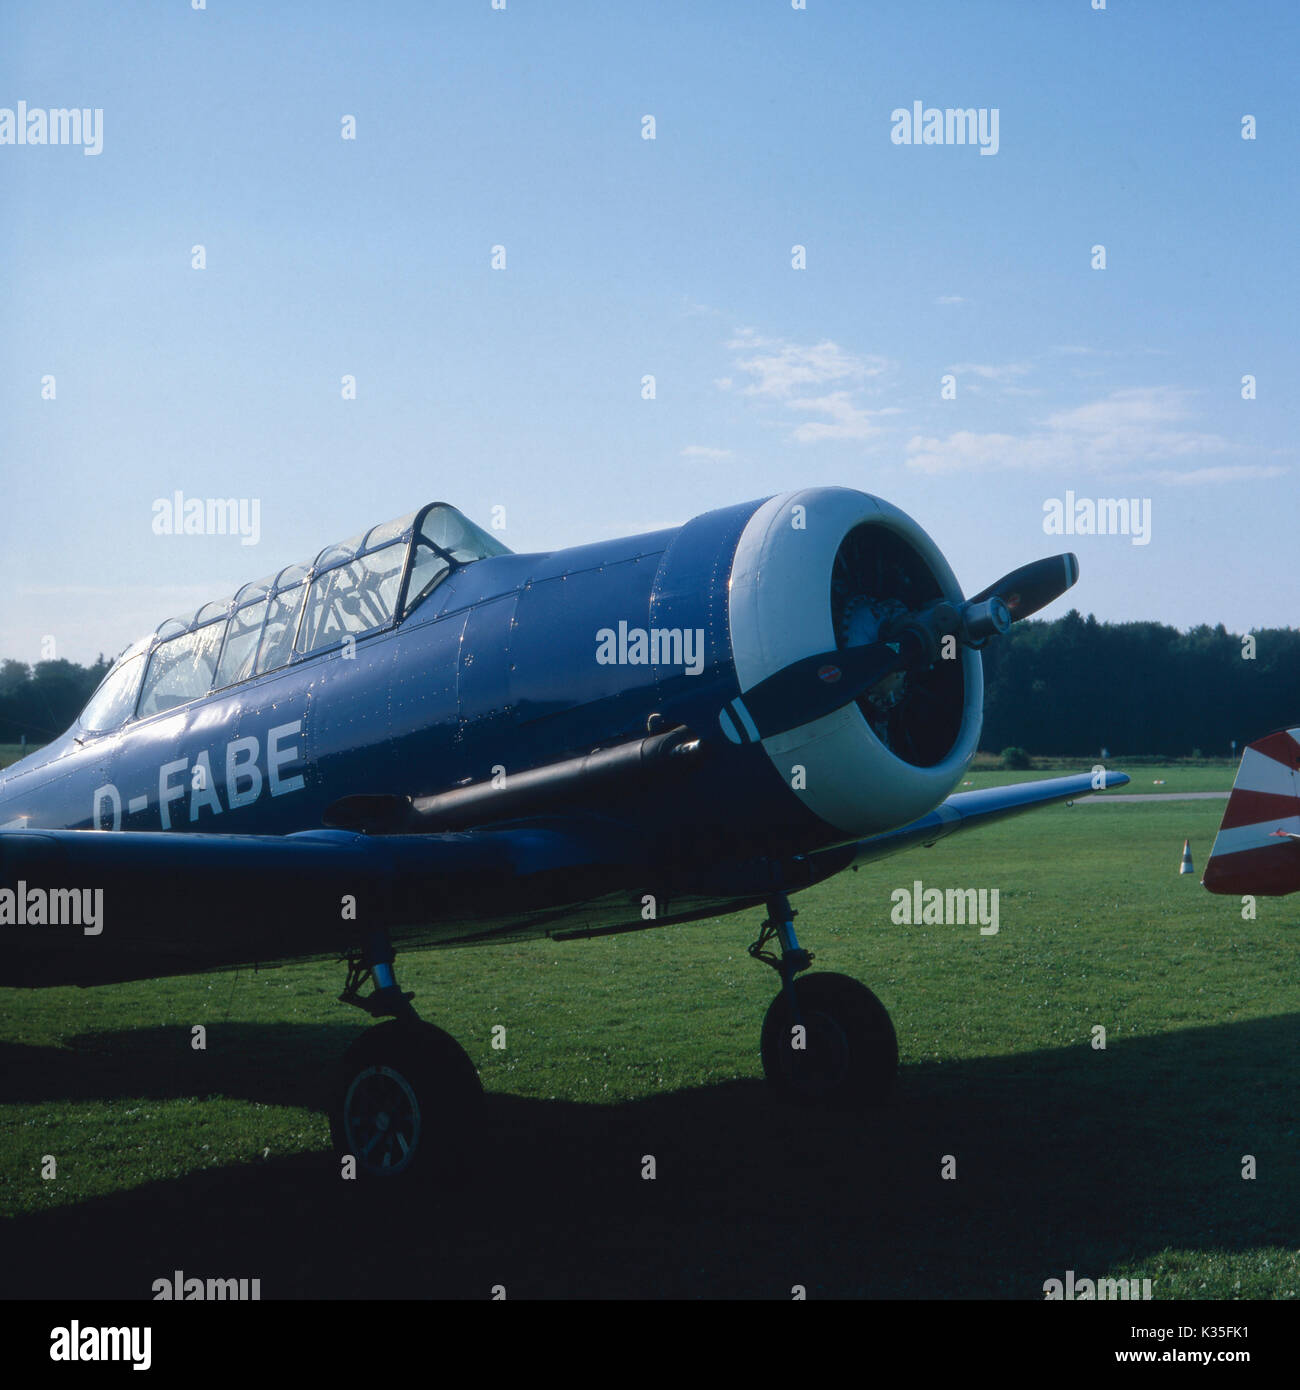 Flugzeug Boing Airplane aus dem Baujahr 1942 mit 550 PS, 1980er. Aircraft Boing Airplane from the year 1942 with 550 HP, 1980s. Stock Photo